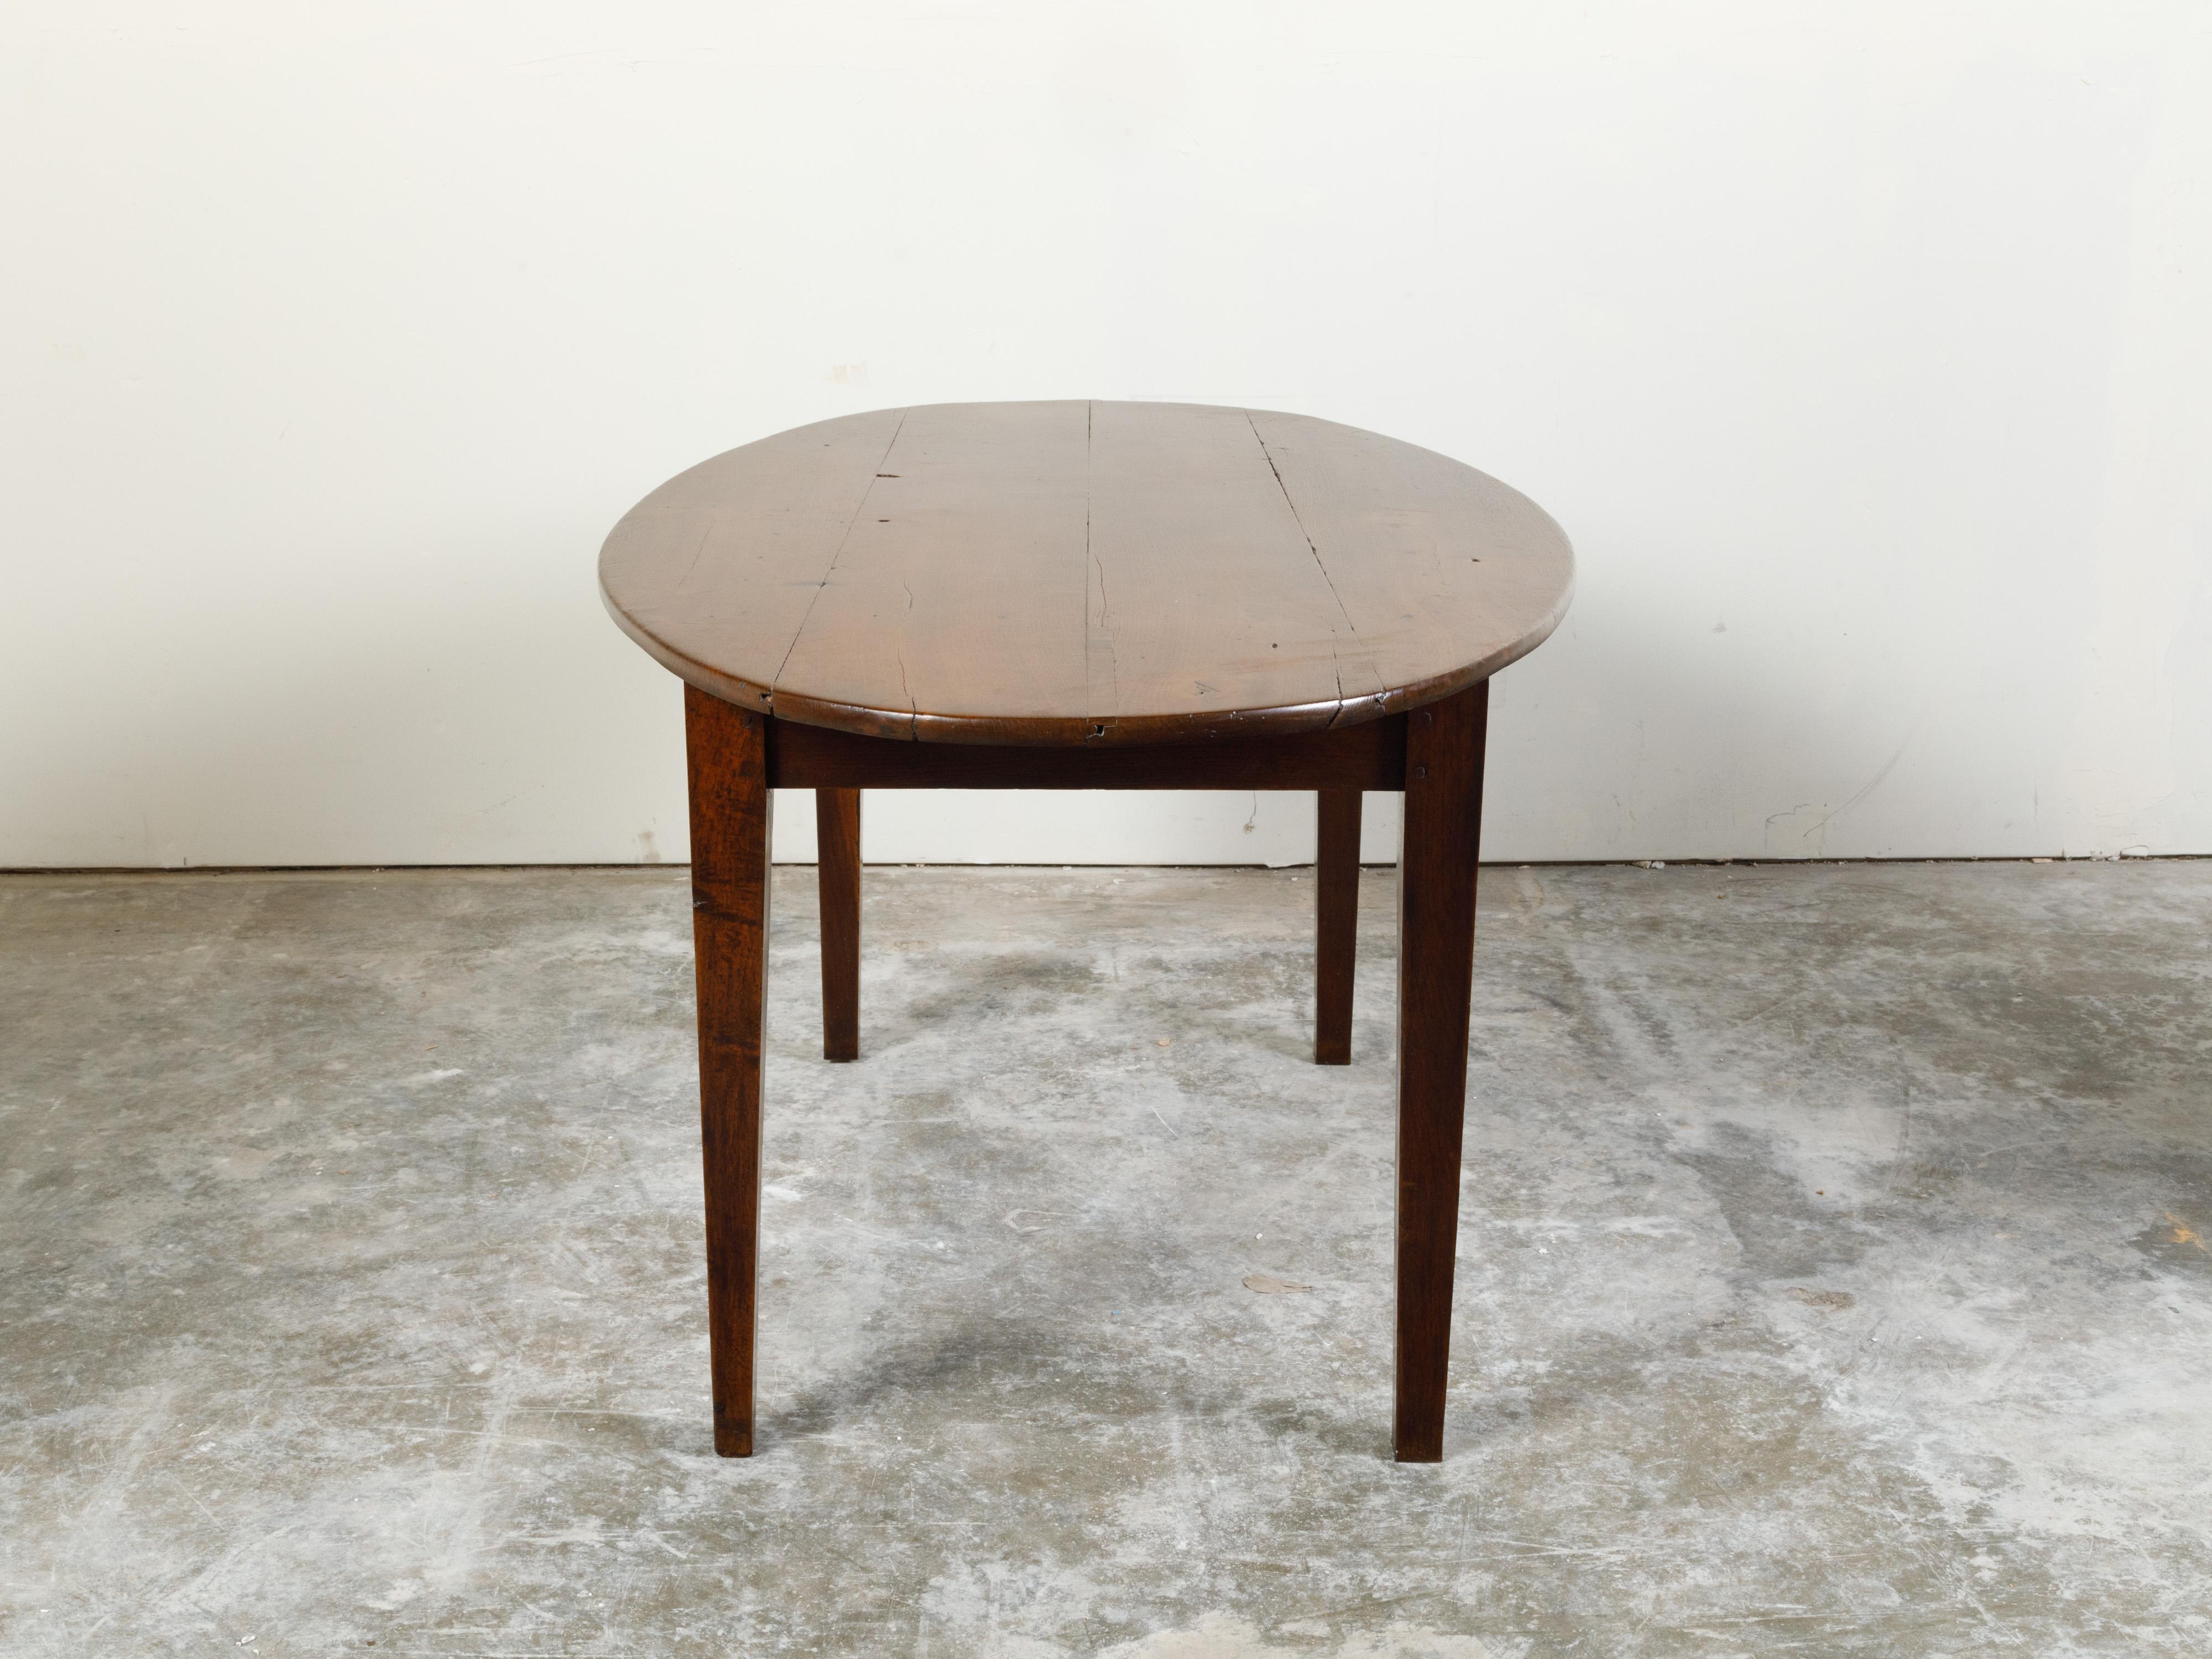 English 19th Century Walnut Table with Oval Top, Tapered Legs and Dark Patina For Sale 3